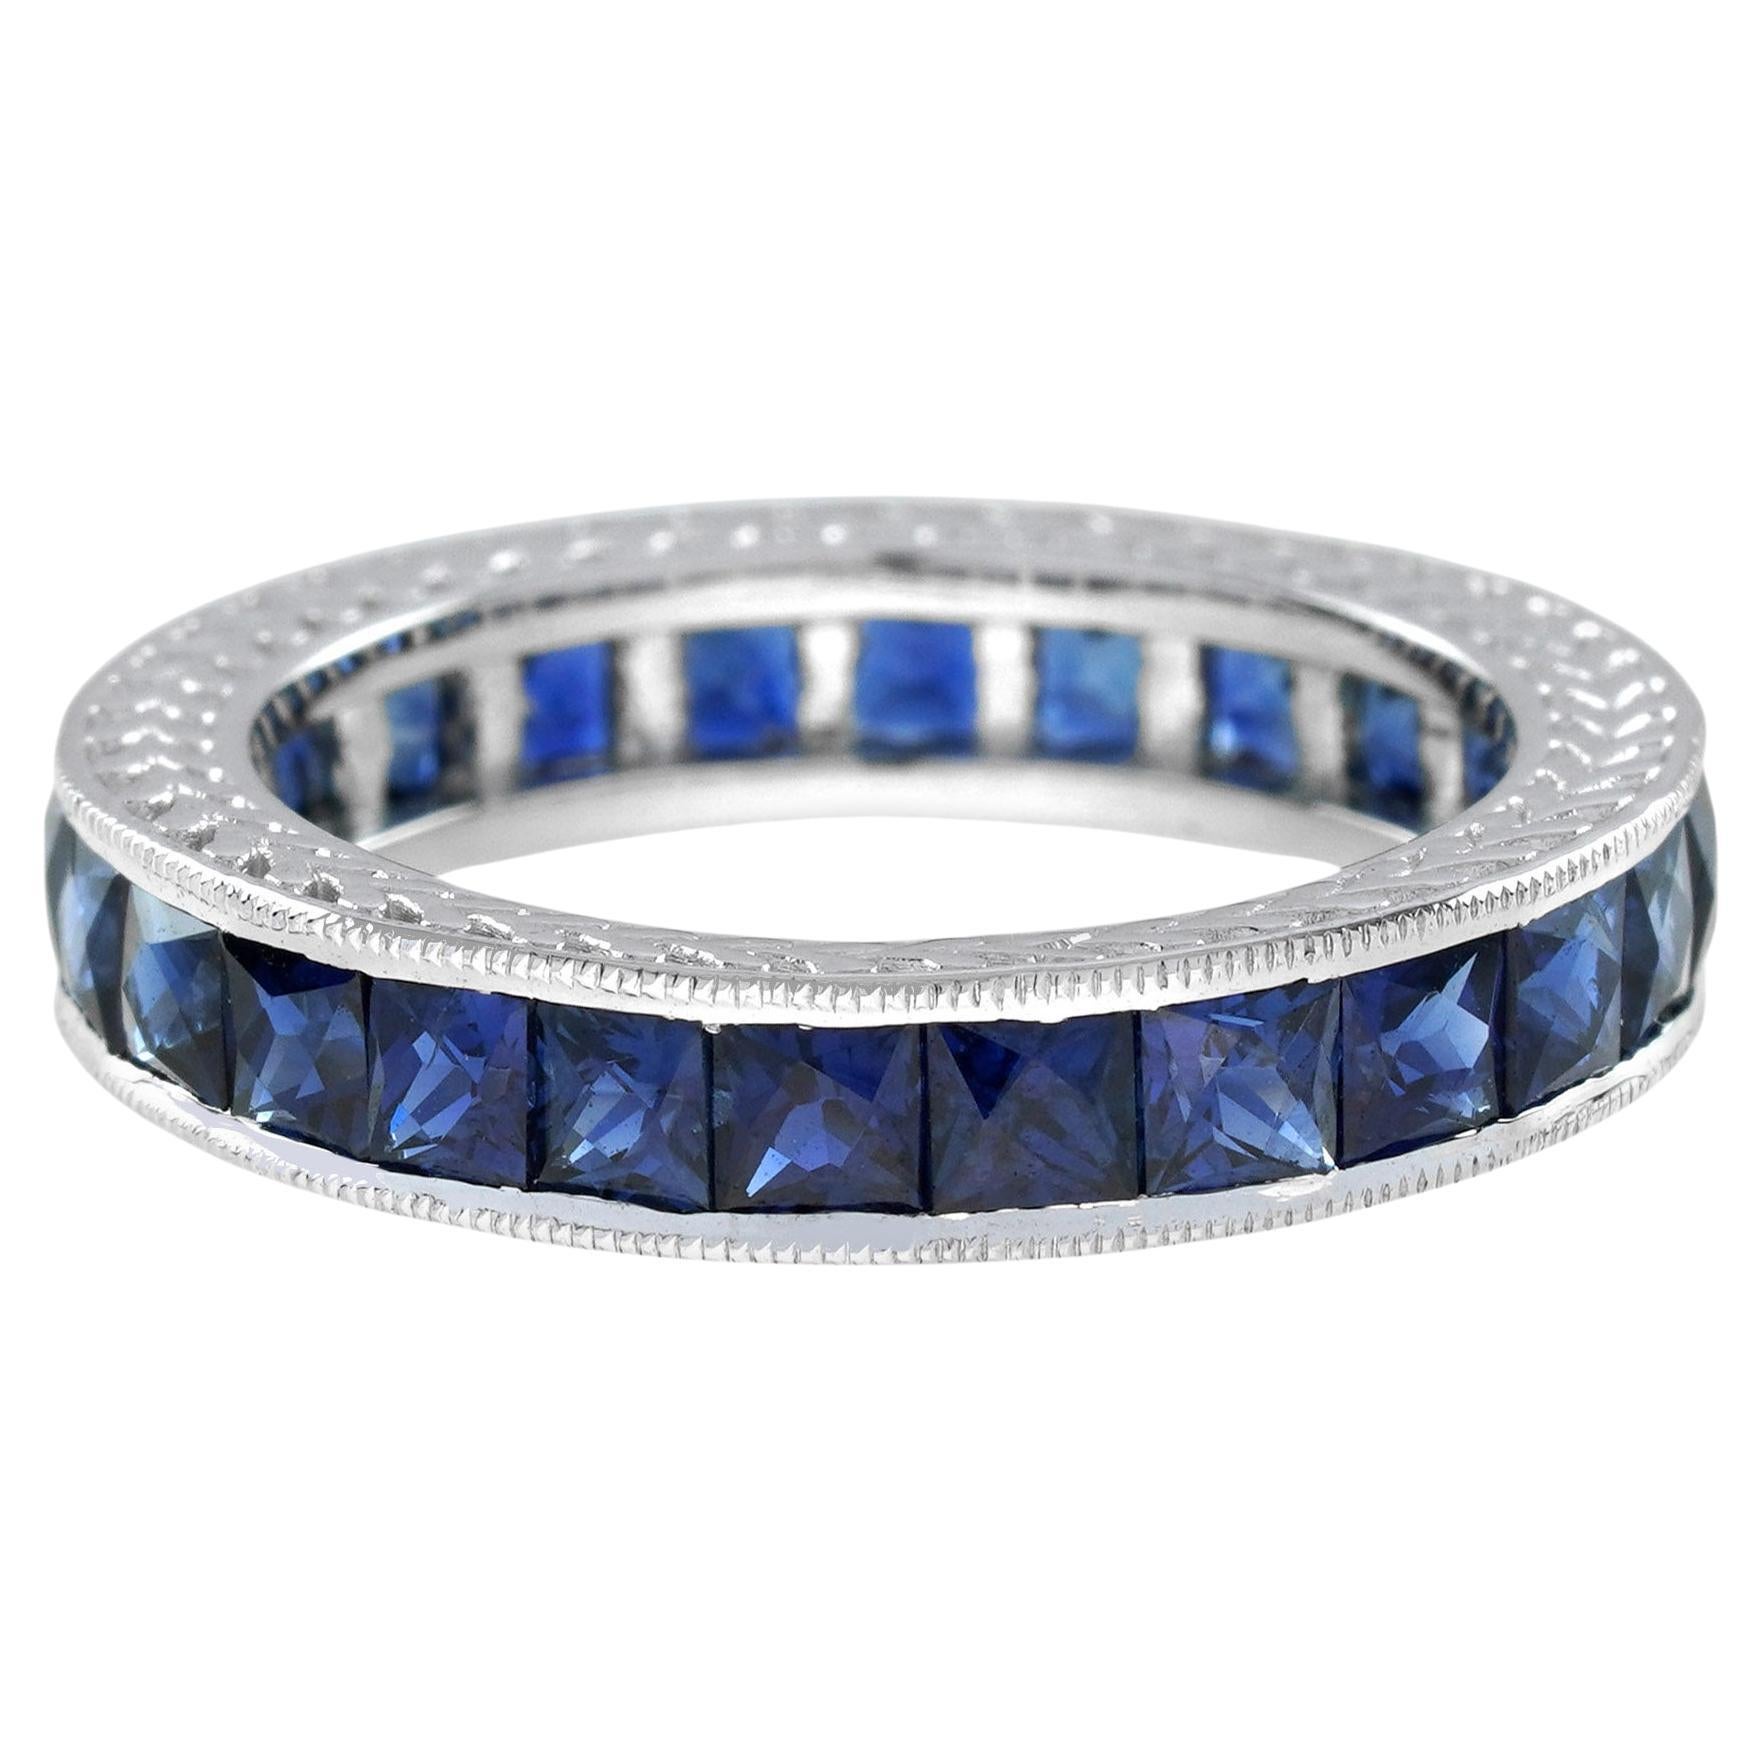 3.25 Ct. Blue Sapphire Antique Style Eternity Band Ring in Platinum 950 For Sale